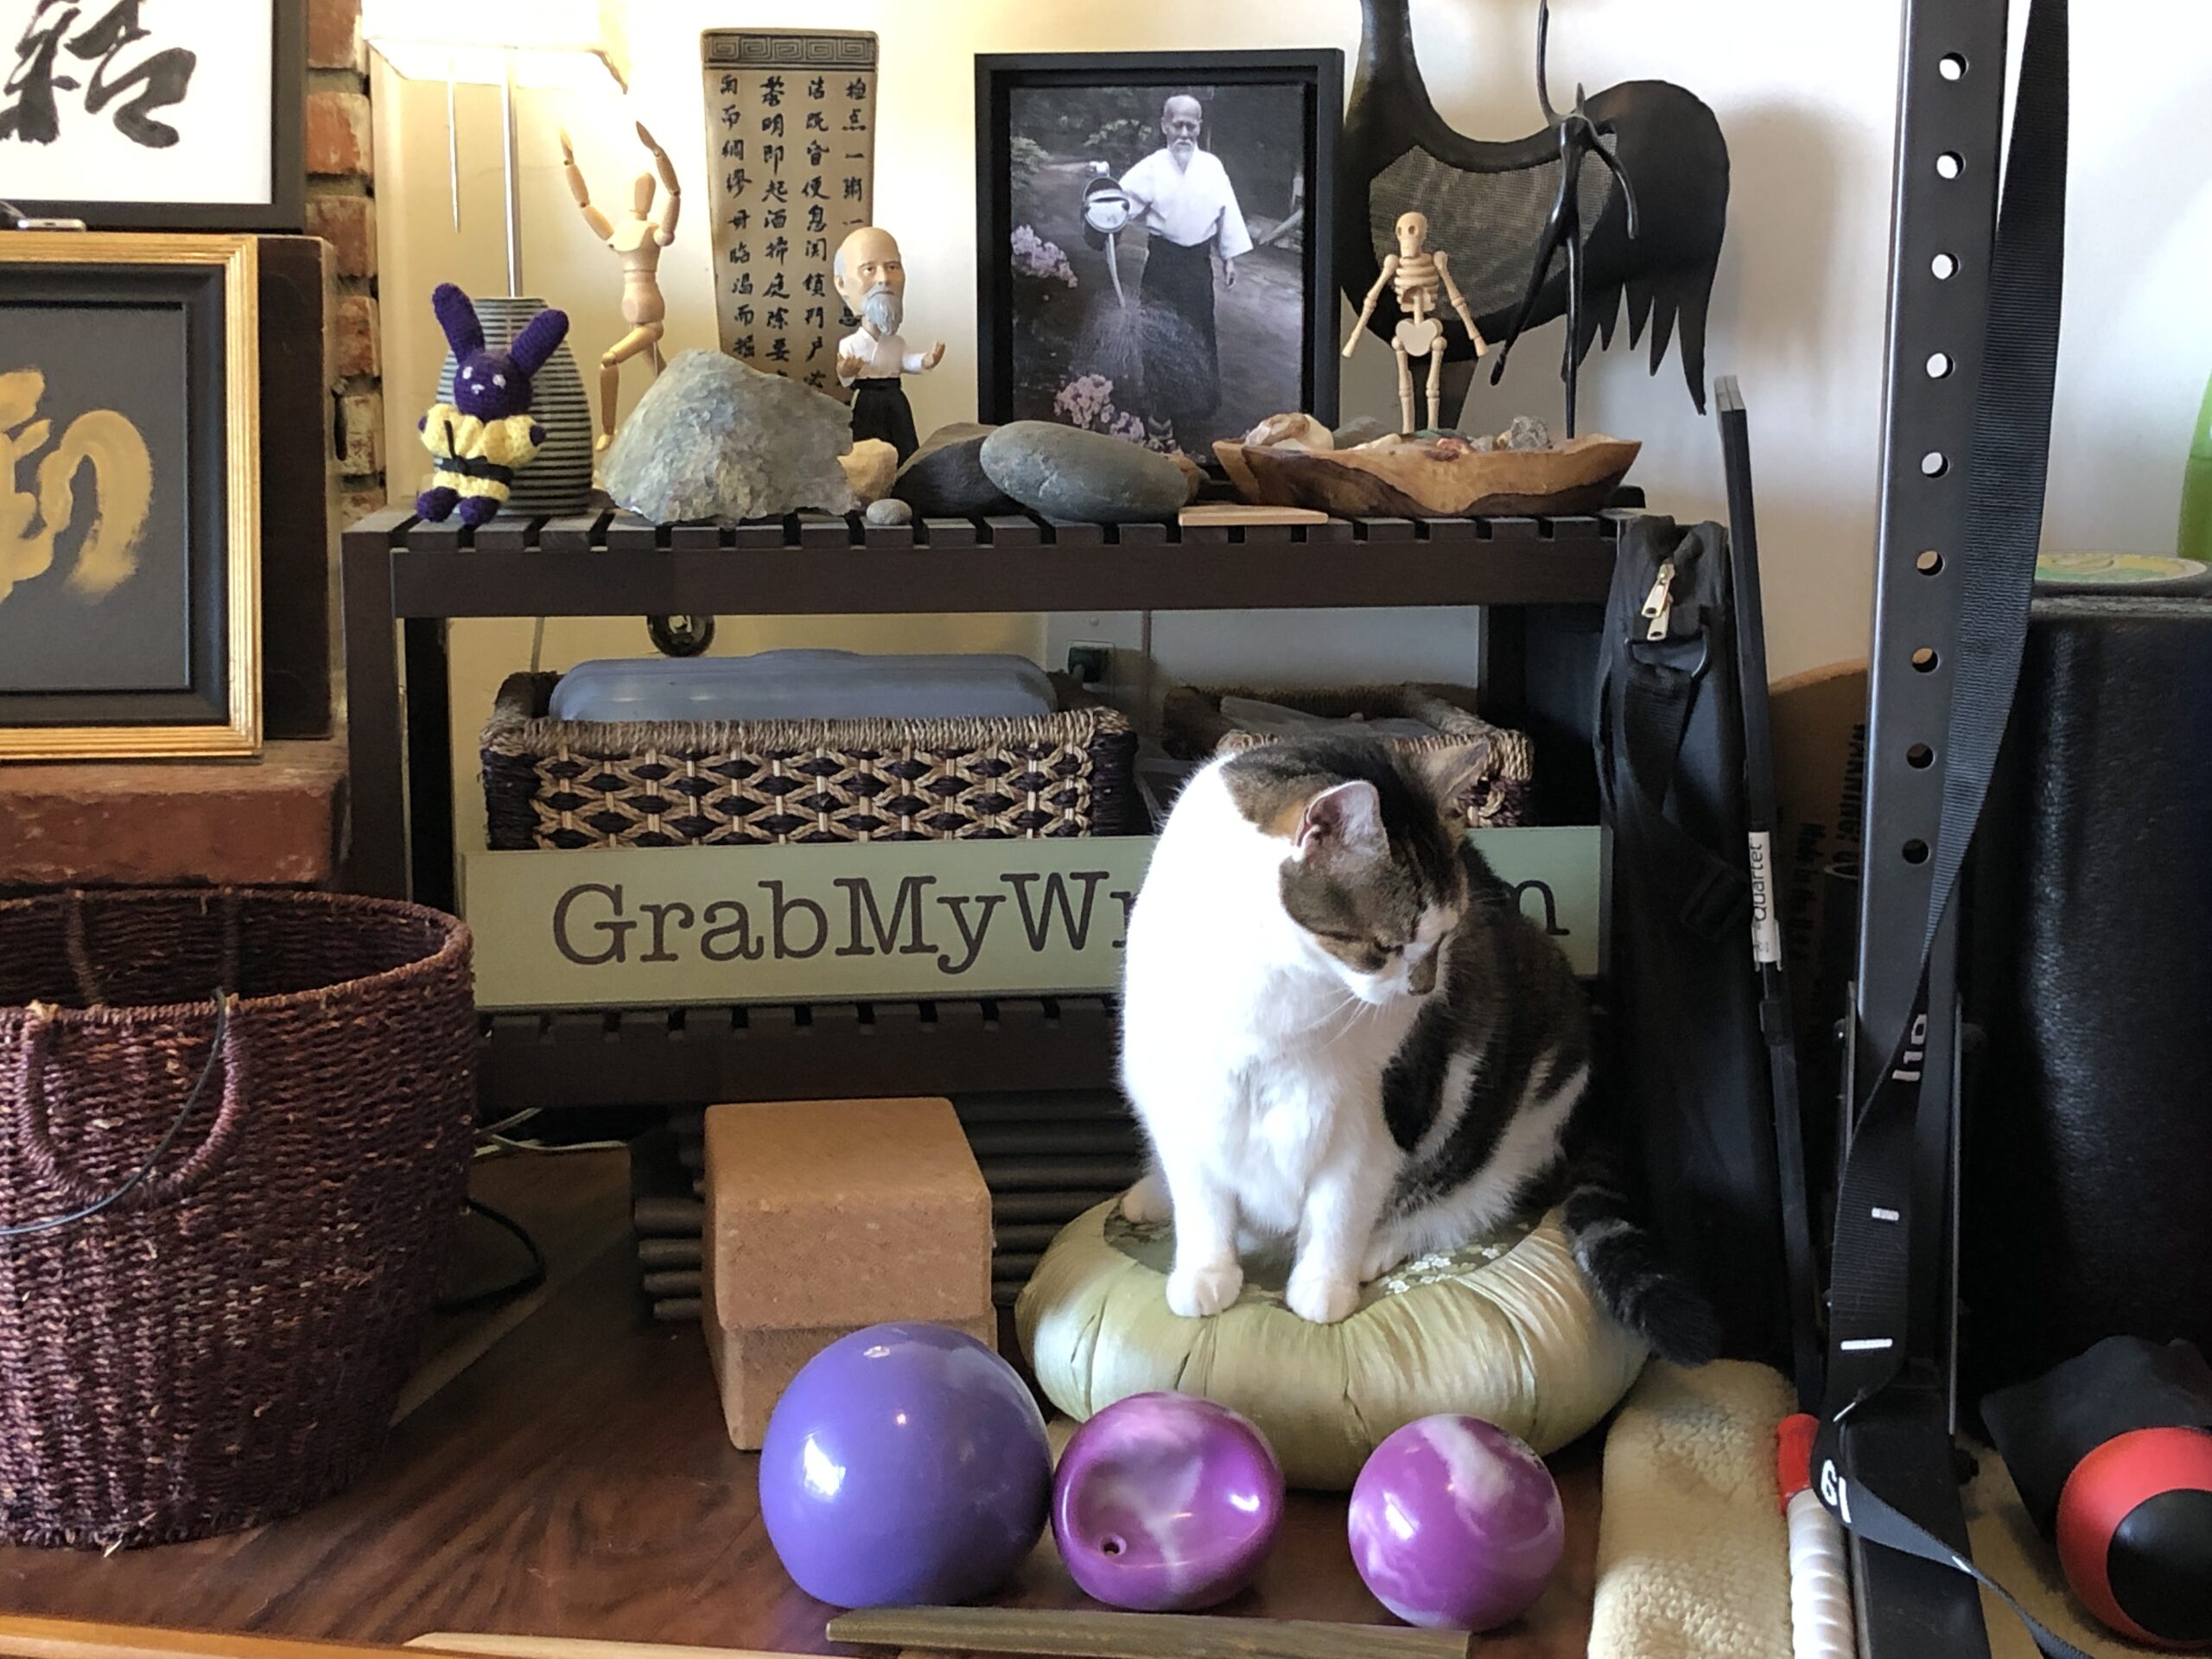 Photo of my home shomen, with a picture of O Sensei watering plants in the garden. Charlie kitty, the chonk, in the foreground, sitting on a zafu.